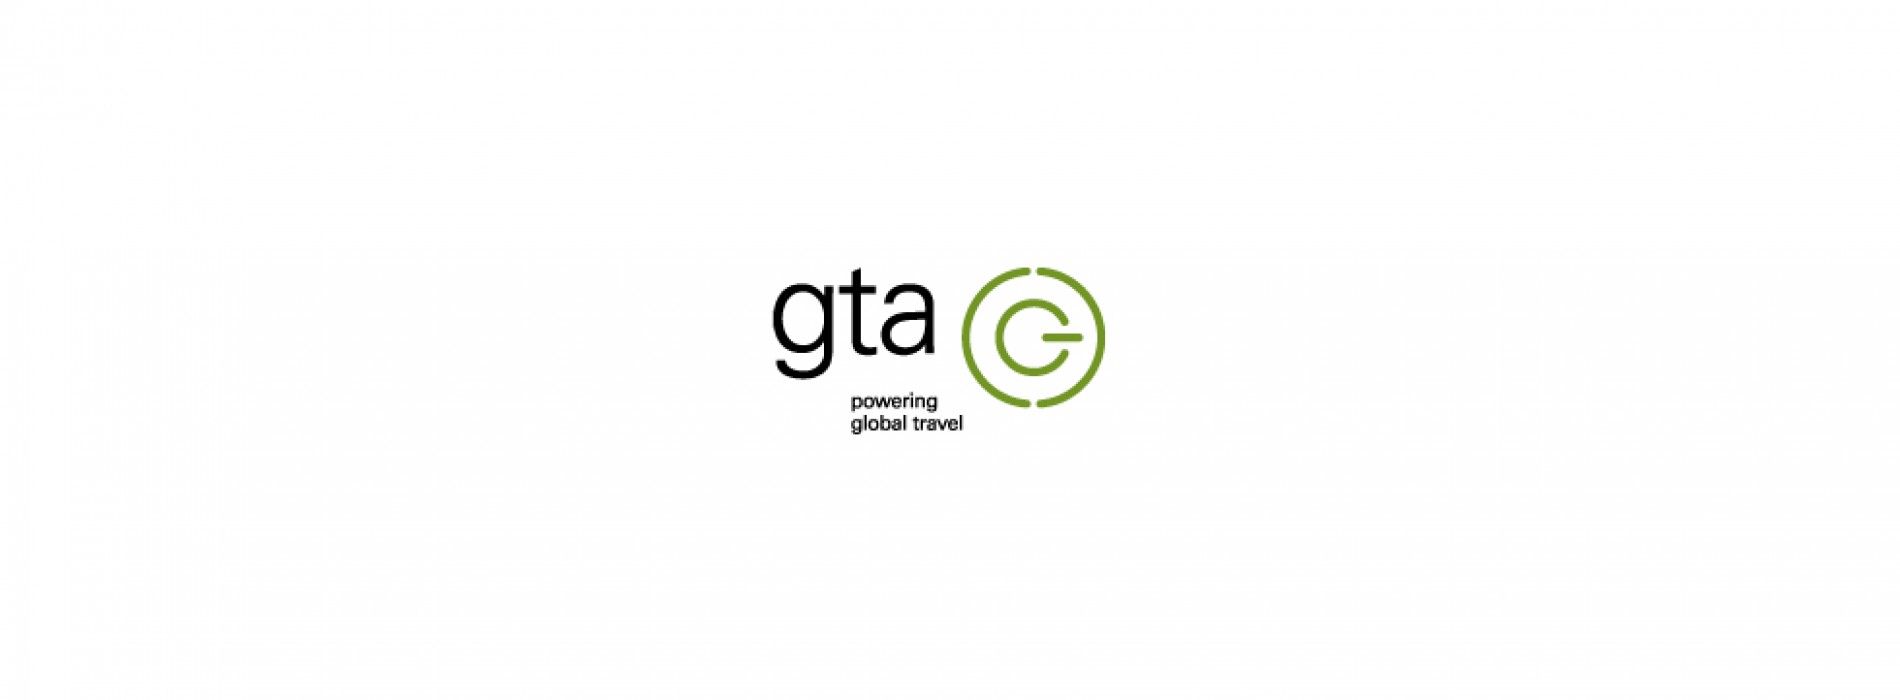 GTA roadshow strengthens the United States as number 1 long-haul destination for the China source market